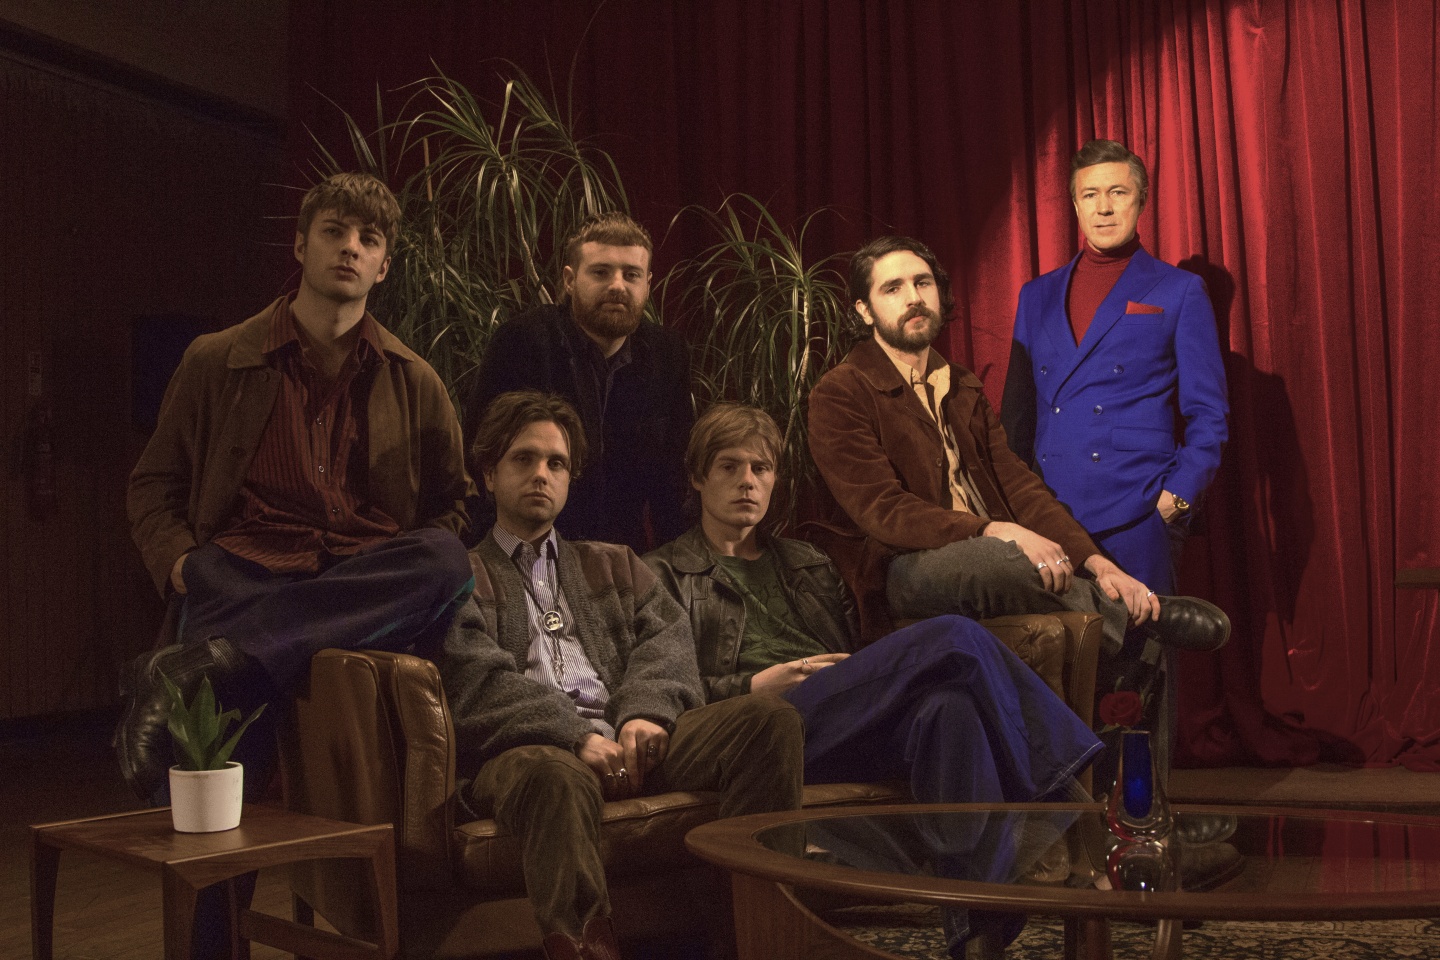 Fontaines D.C. premiere “A Hero’s Death” and discuss the path to their second LP